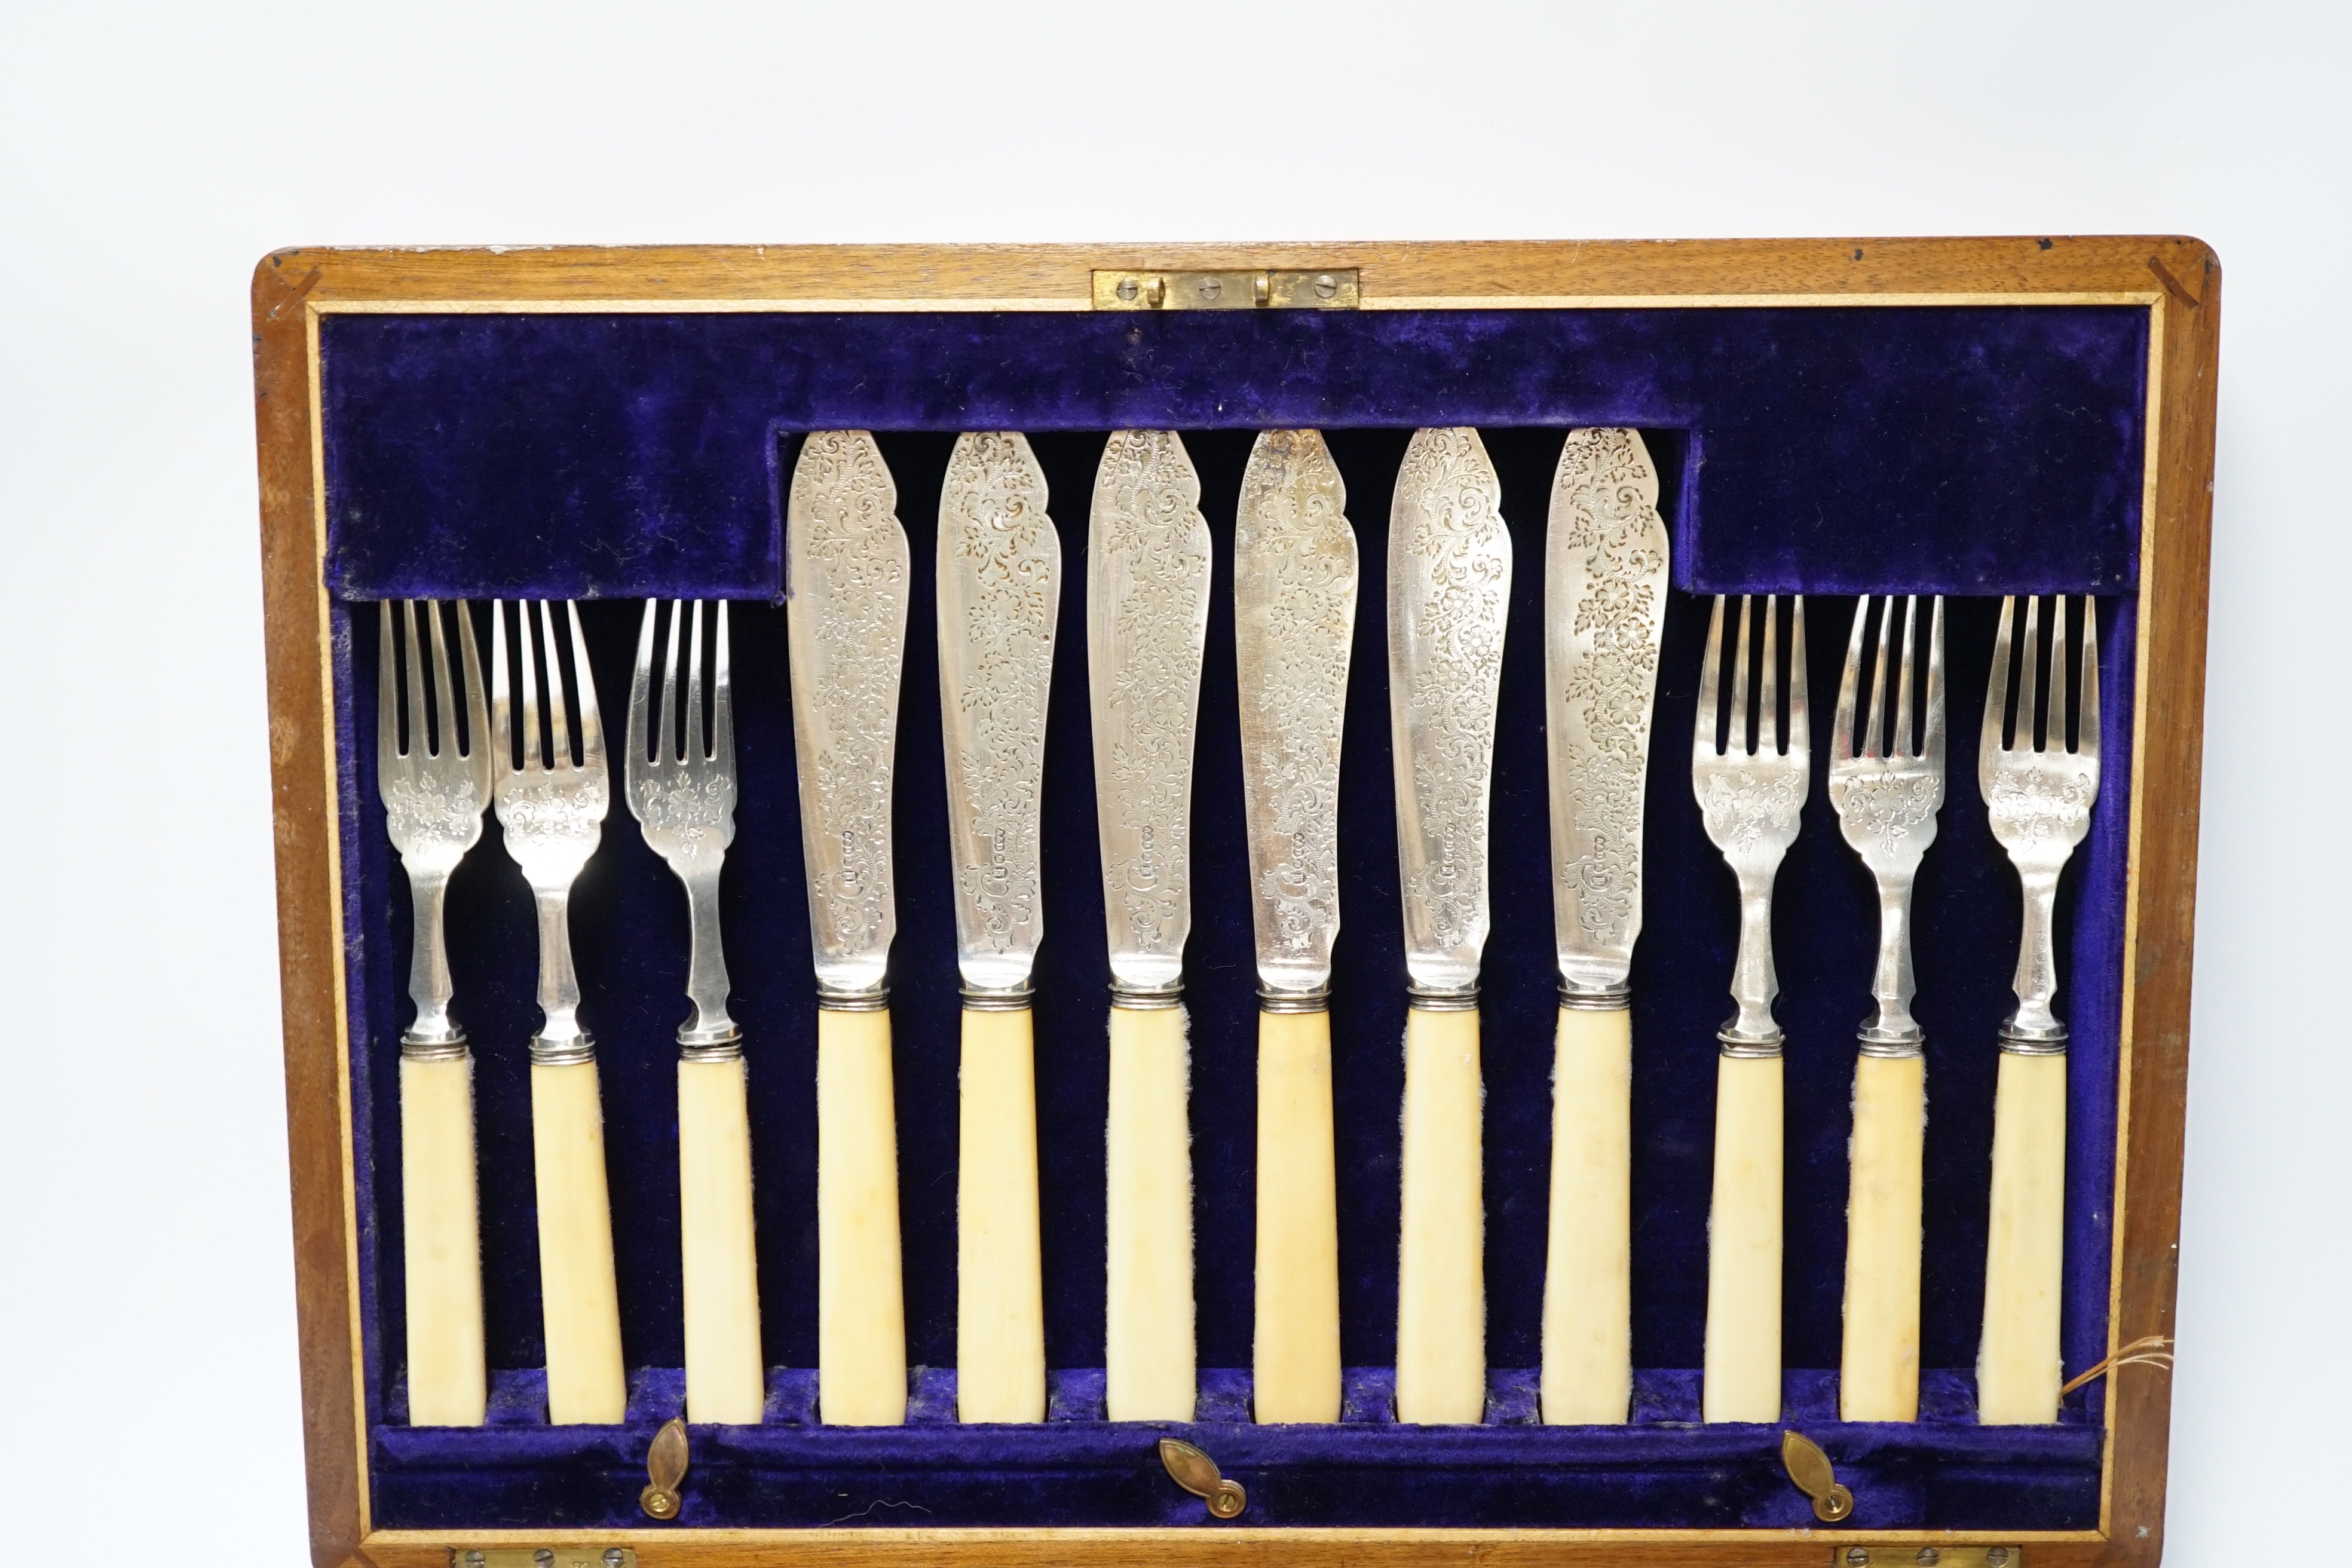 A set of twelve plated engraved fish knives and forks, with bone handles, cased together with a pair of plated fish servers with ivorine handles